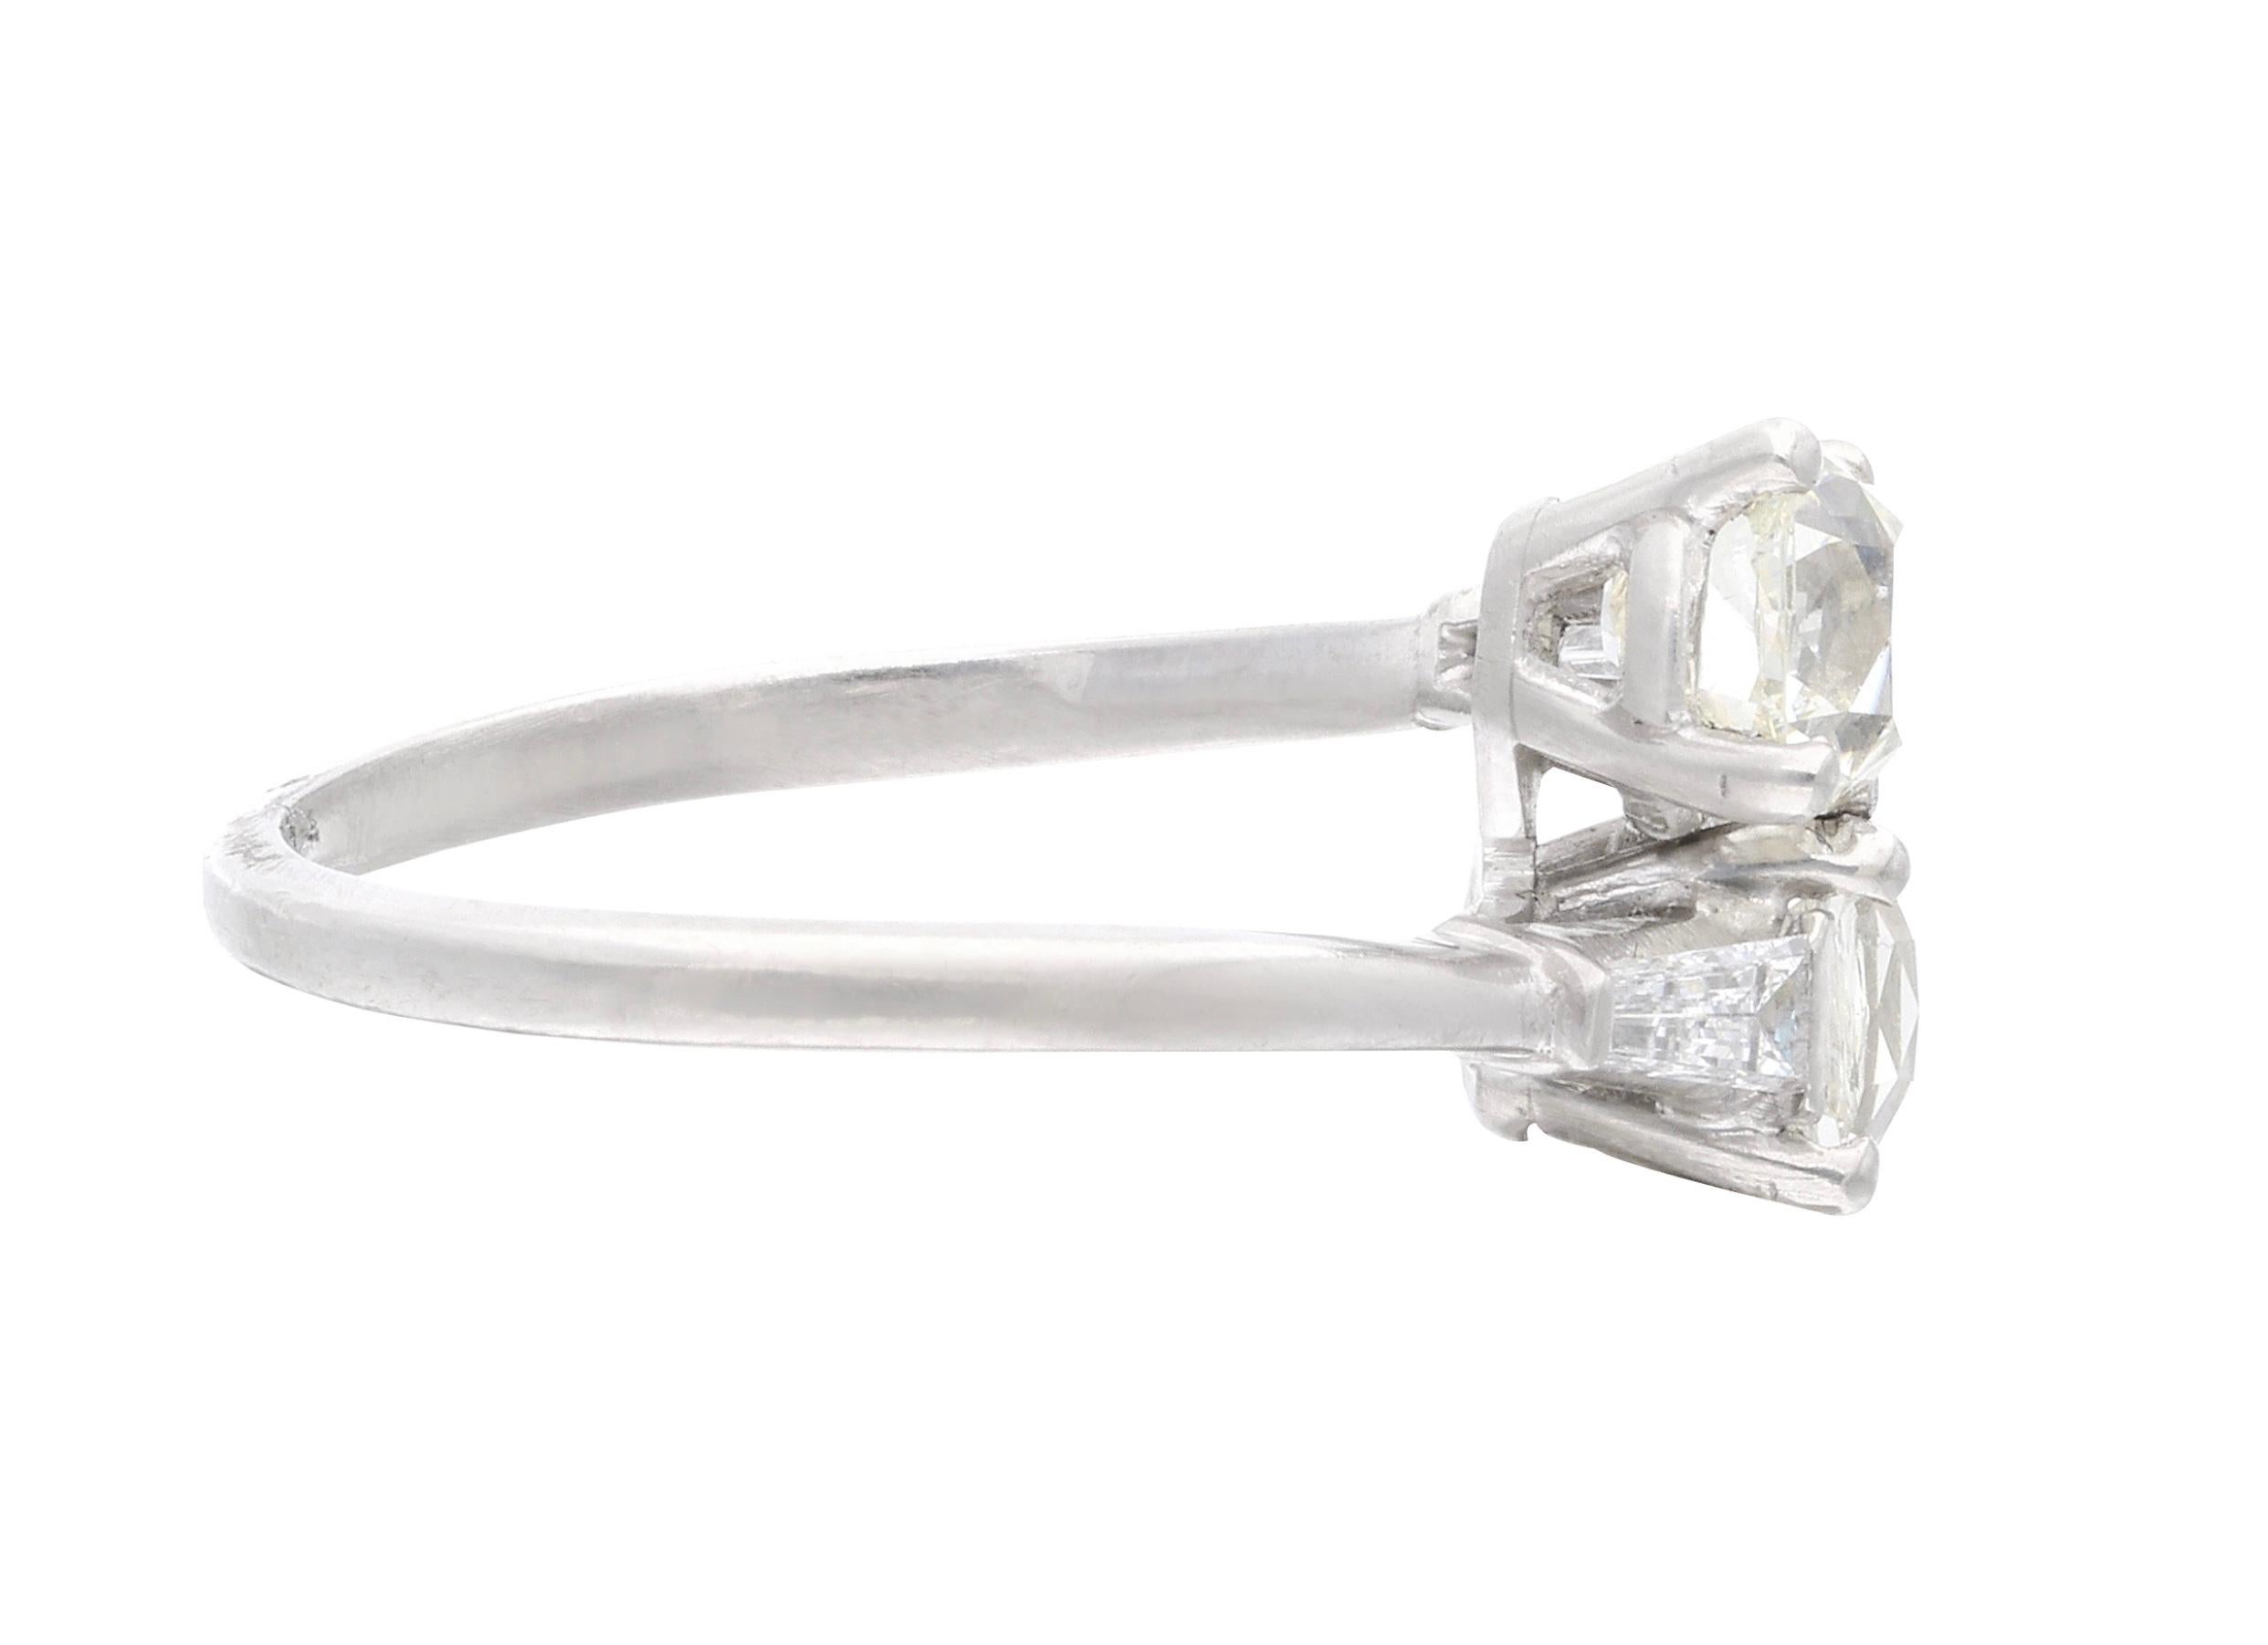 This ring features two bypassing old mine cut diamonds, accented by two tapper baguette diamonds.

- Old mine cut diamonds weighing a total of approximately 1.70 carats
- Tapper baguette diamonds weighing a total of approximately 0.30